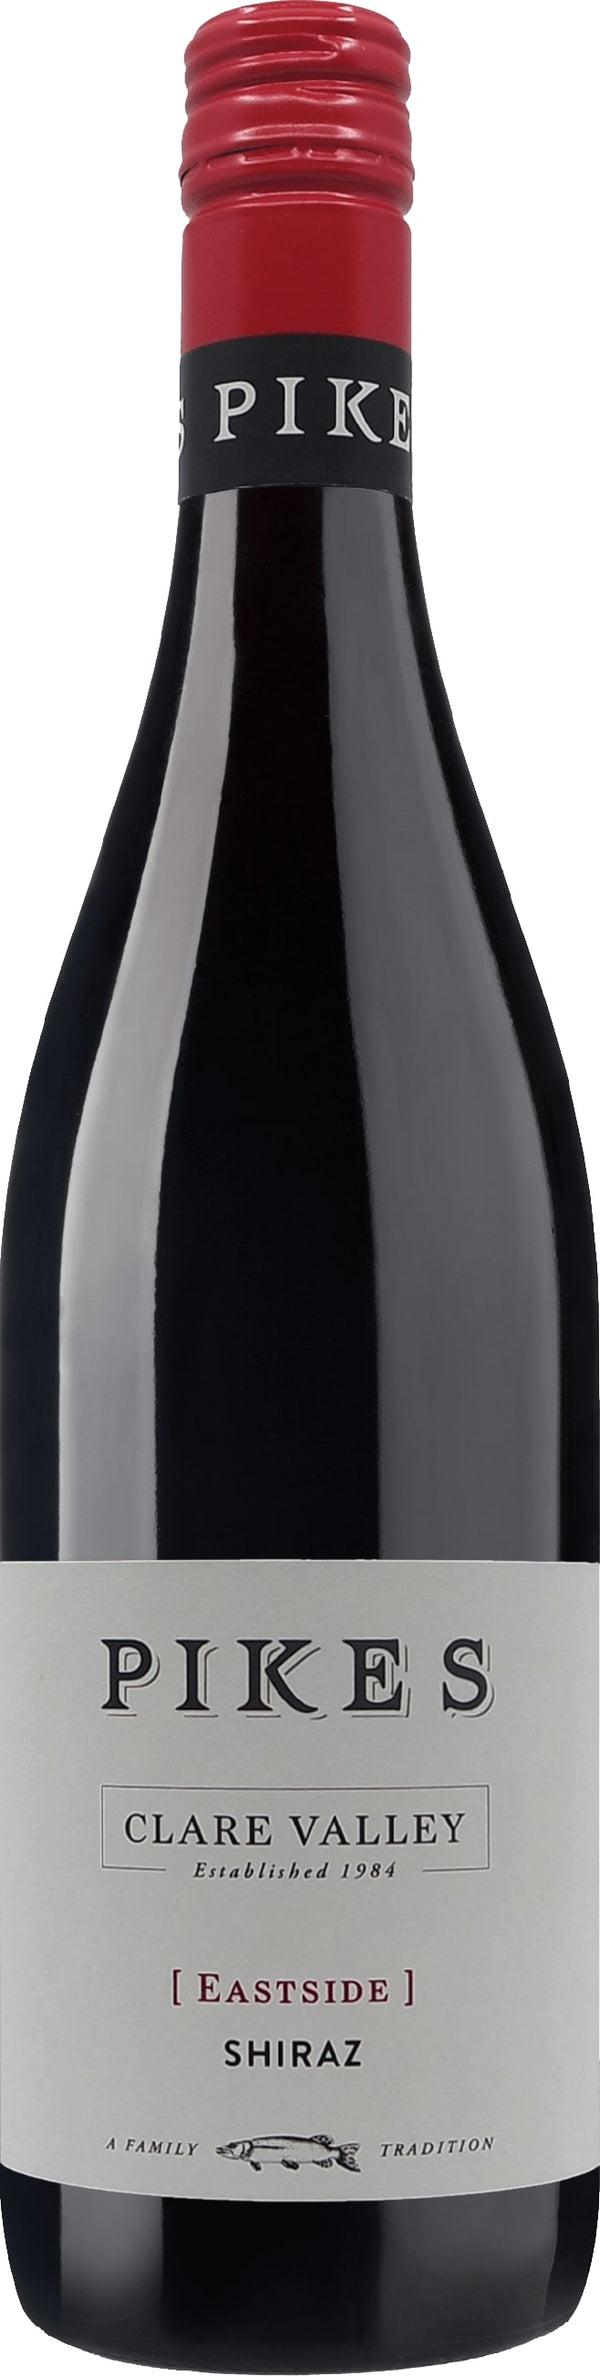 Pikes Eastside Shiraz 2017 6x75cl - Just Wines 